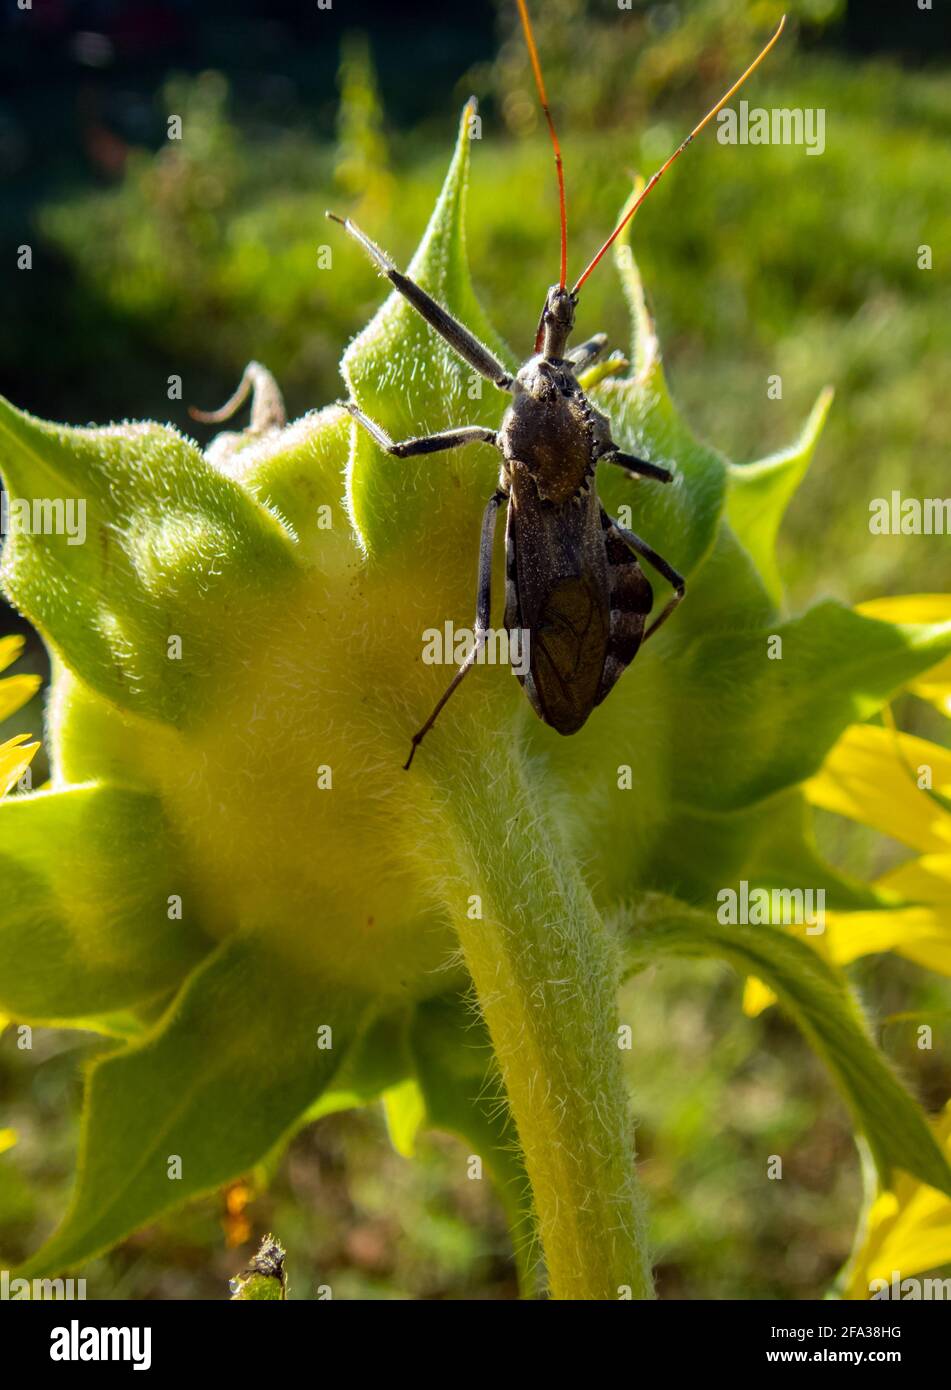 A macro photograph of a wheel bug standing on the back of a sunflower plant in Missouri just waiting for its prey. Bokeh affect. Stock Photo